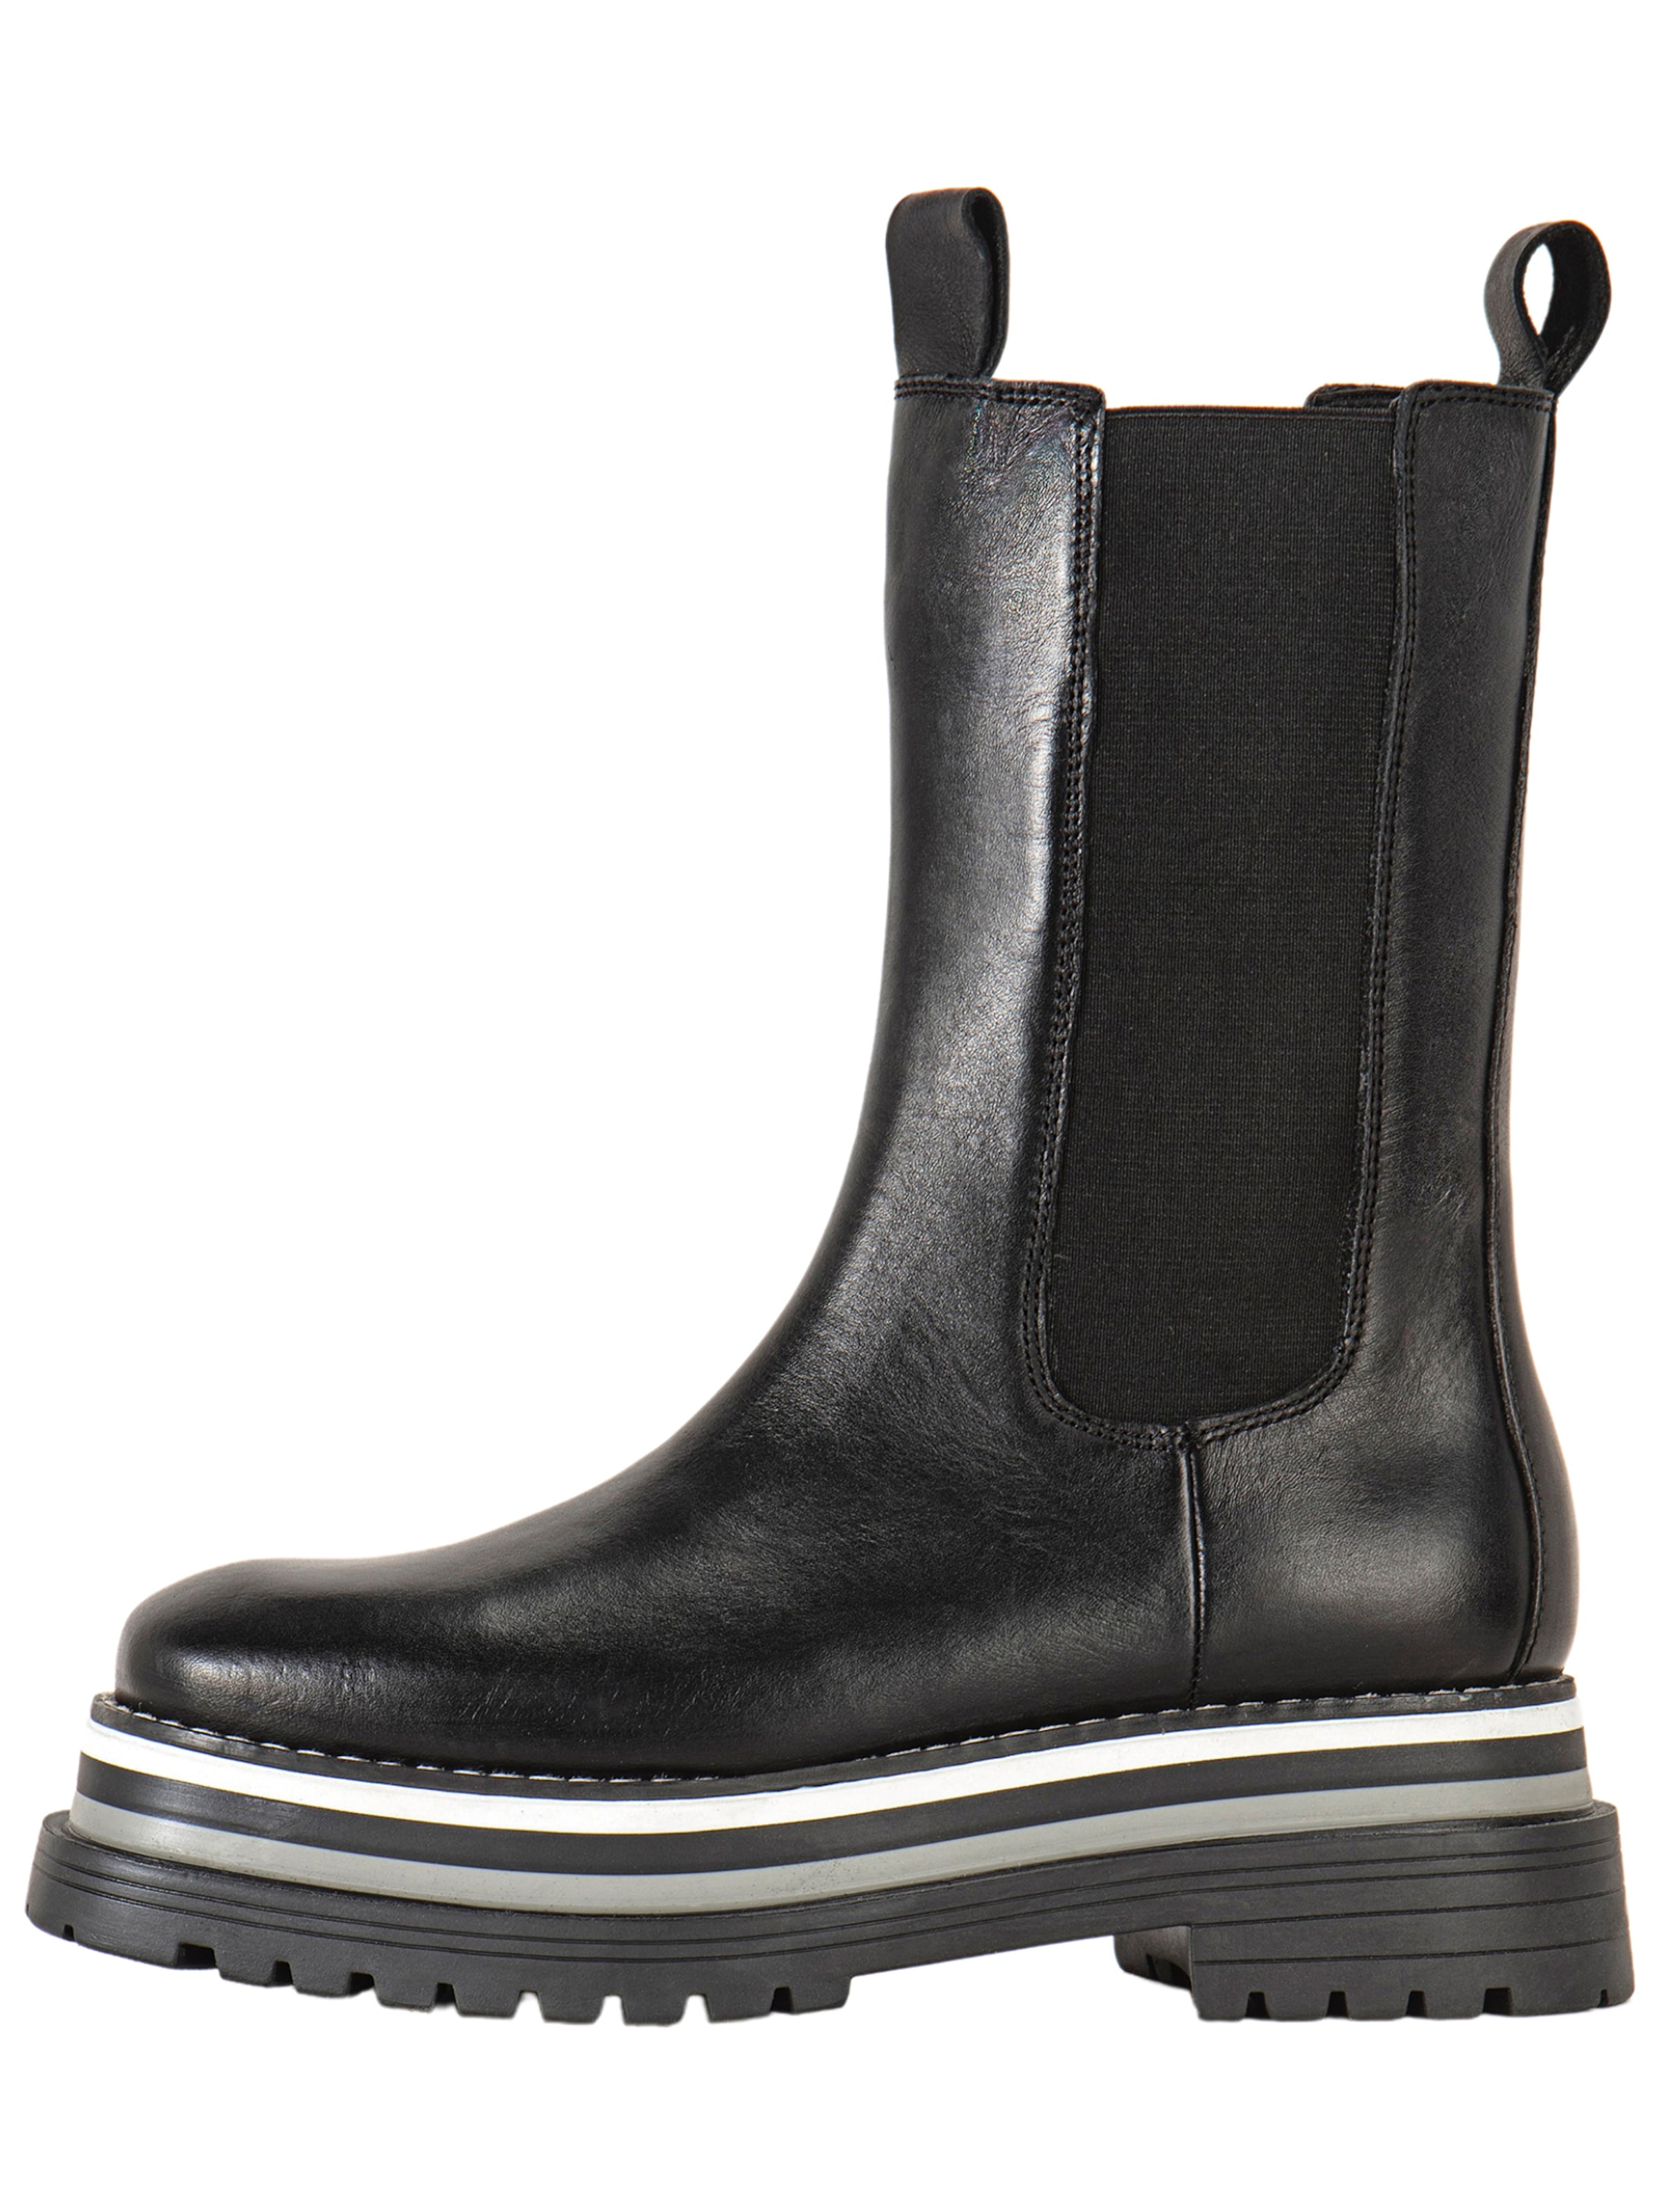 INUOVO Chelsea Boots in Schwarz 